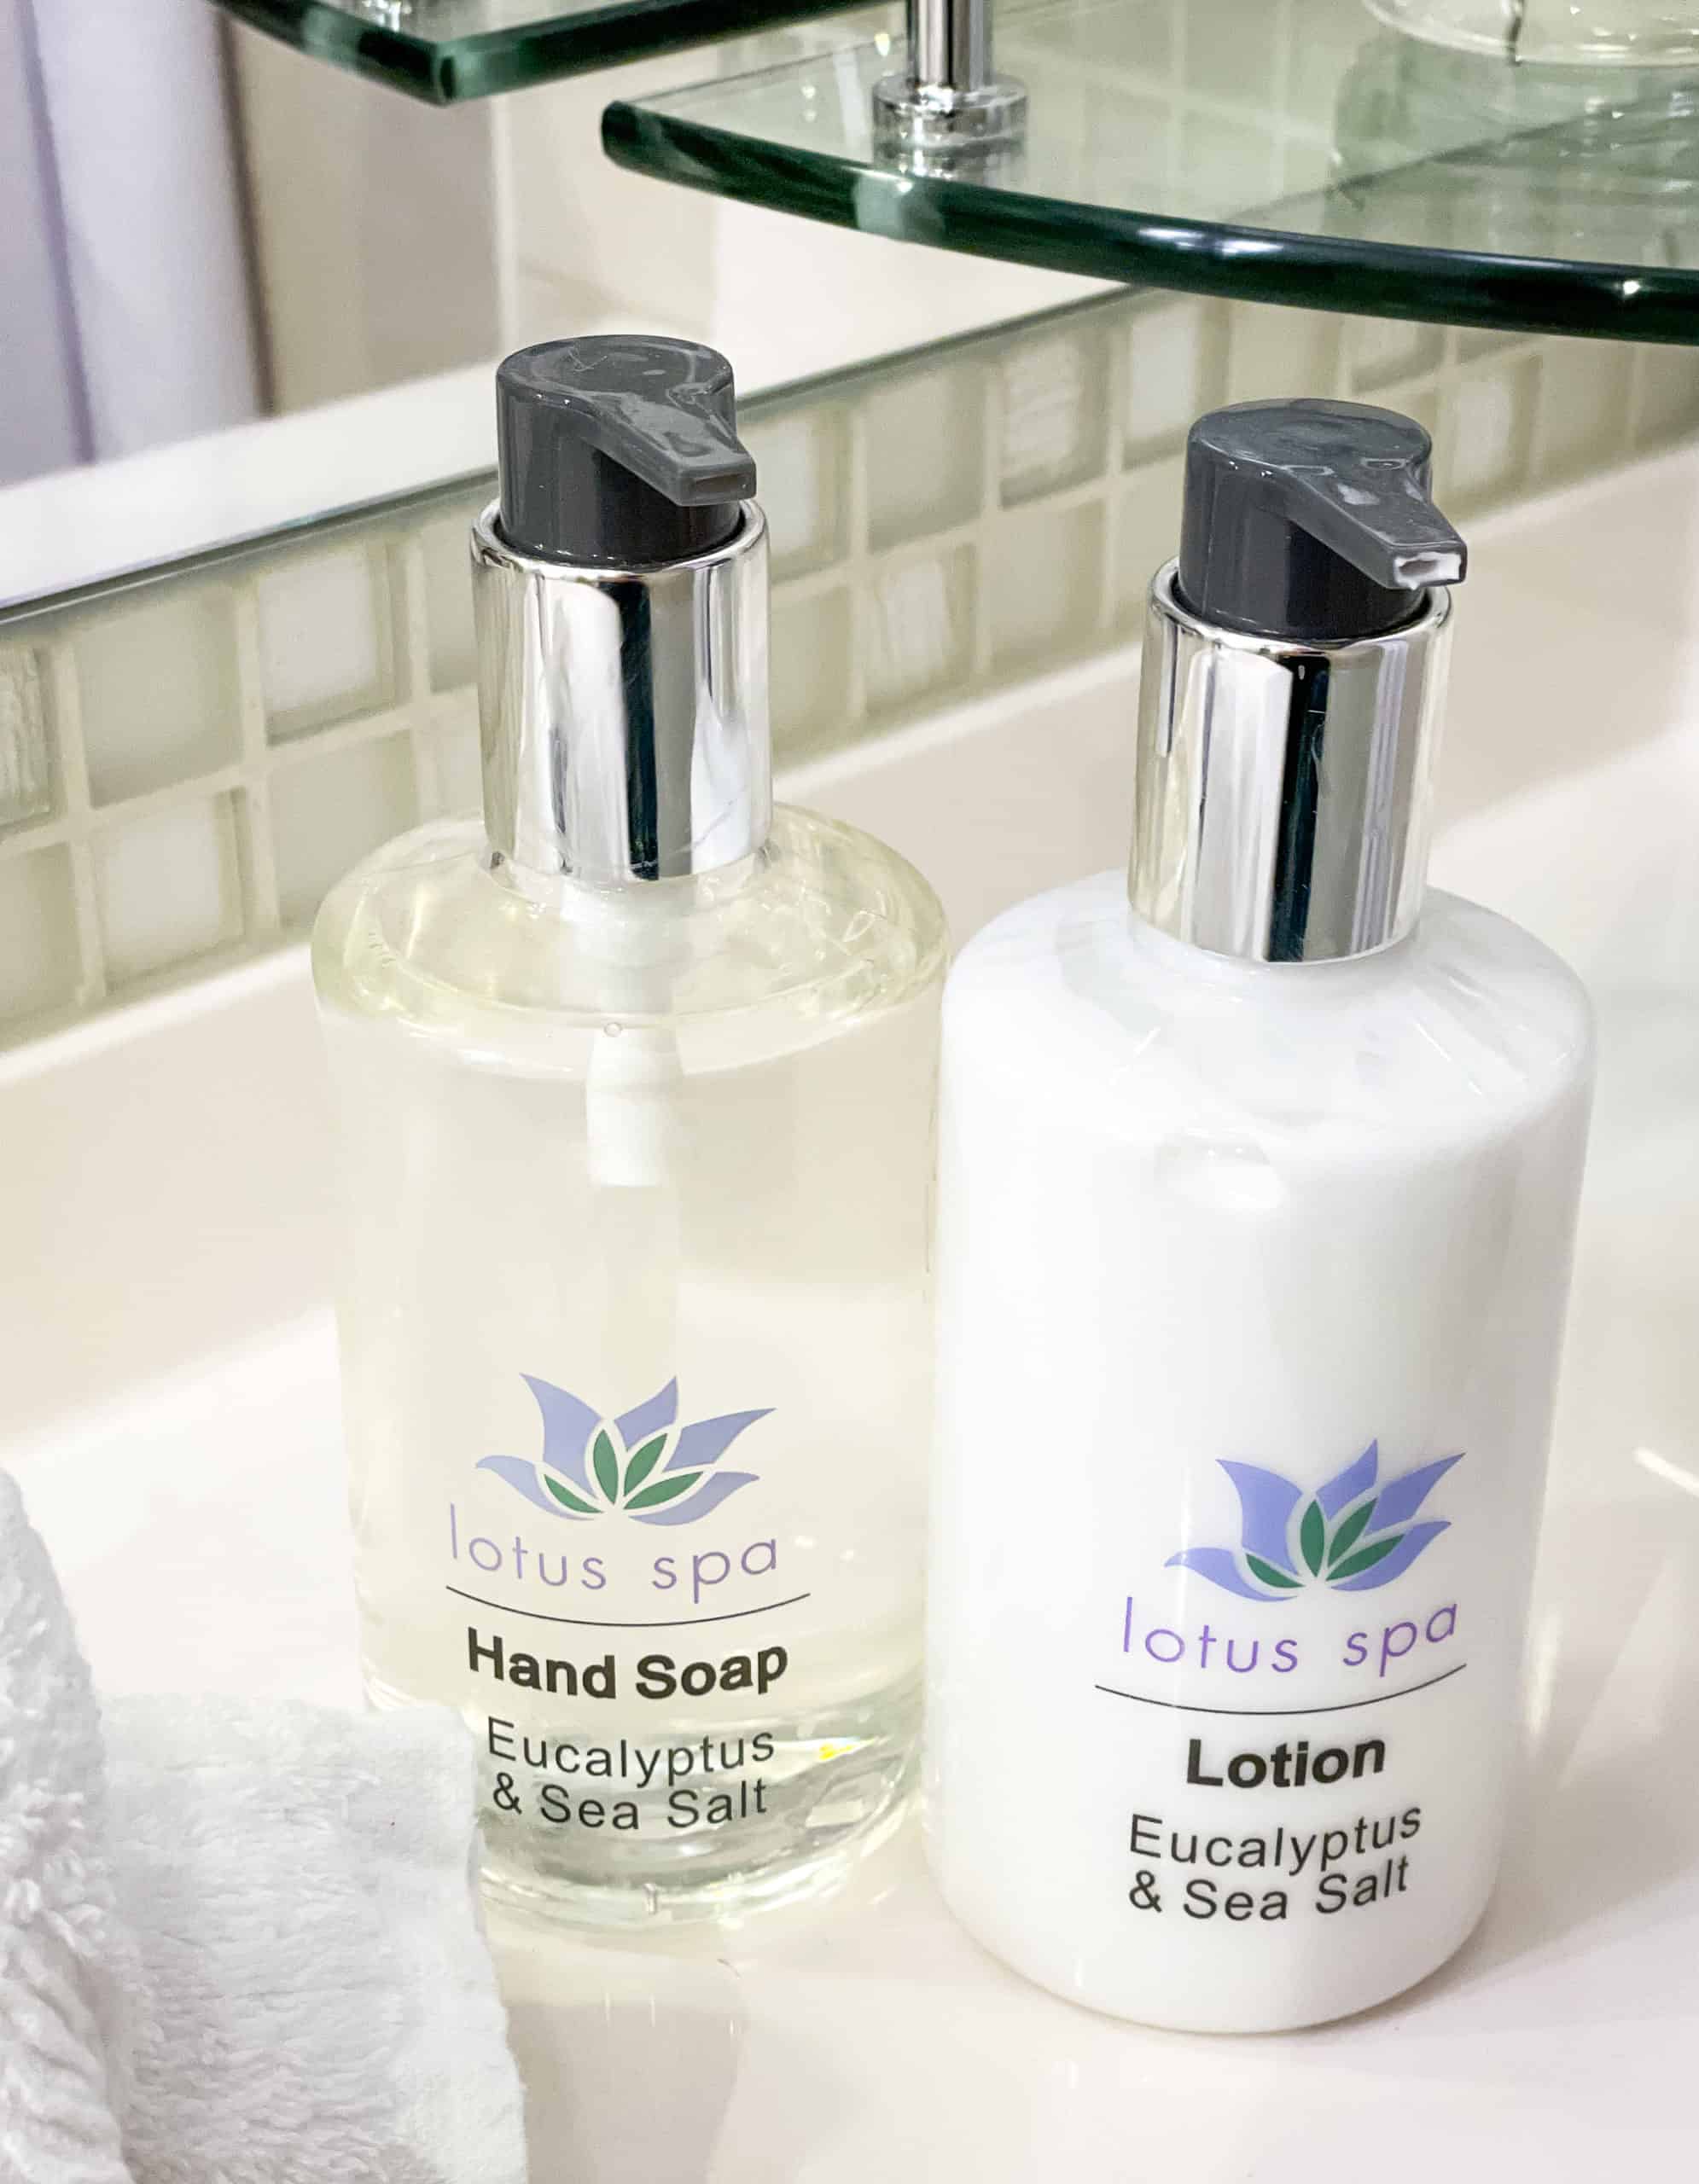 Discovery Princess Review Lotus Spa Bottles